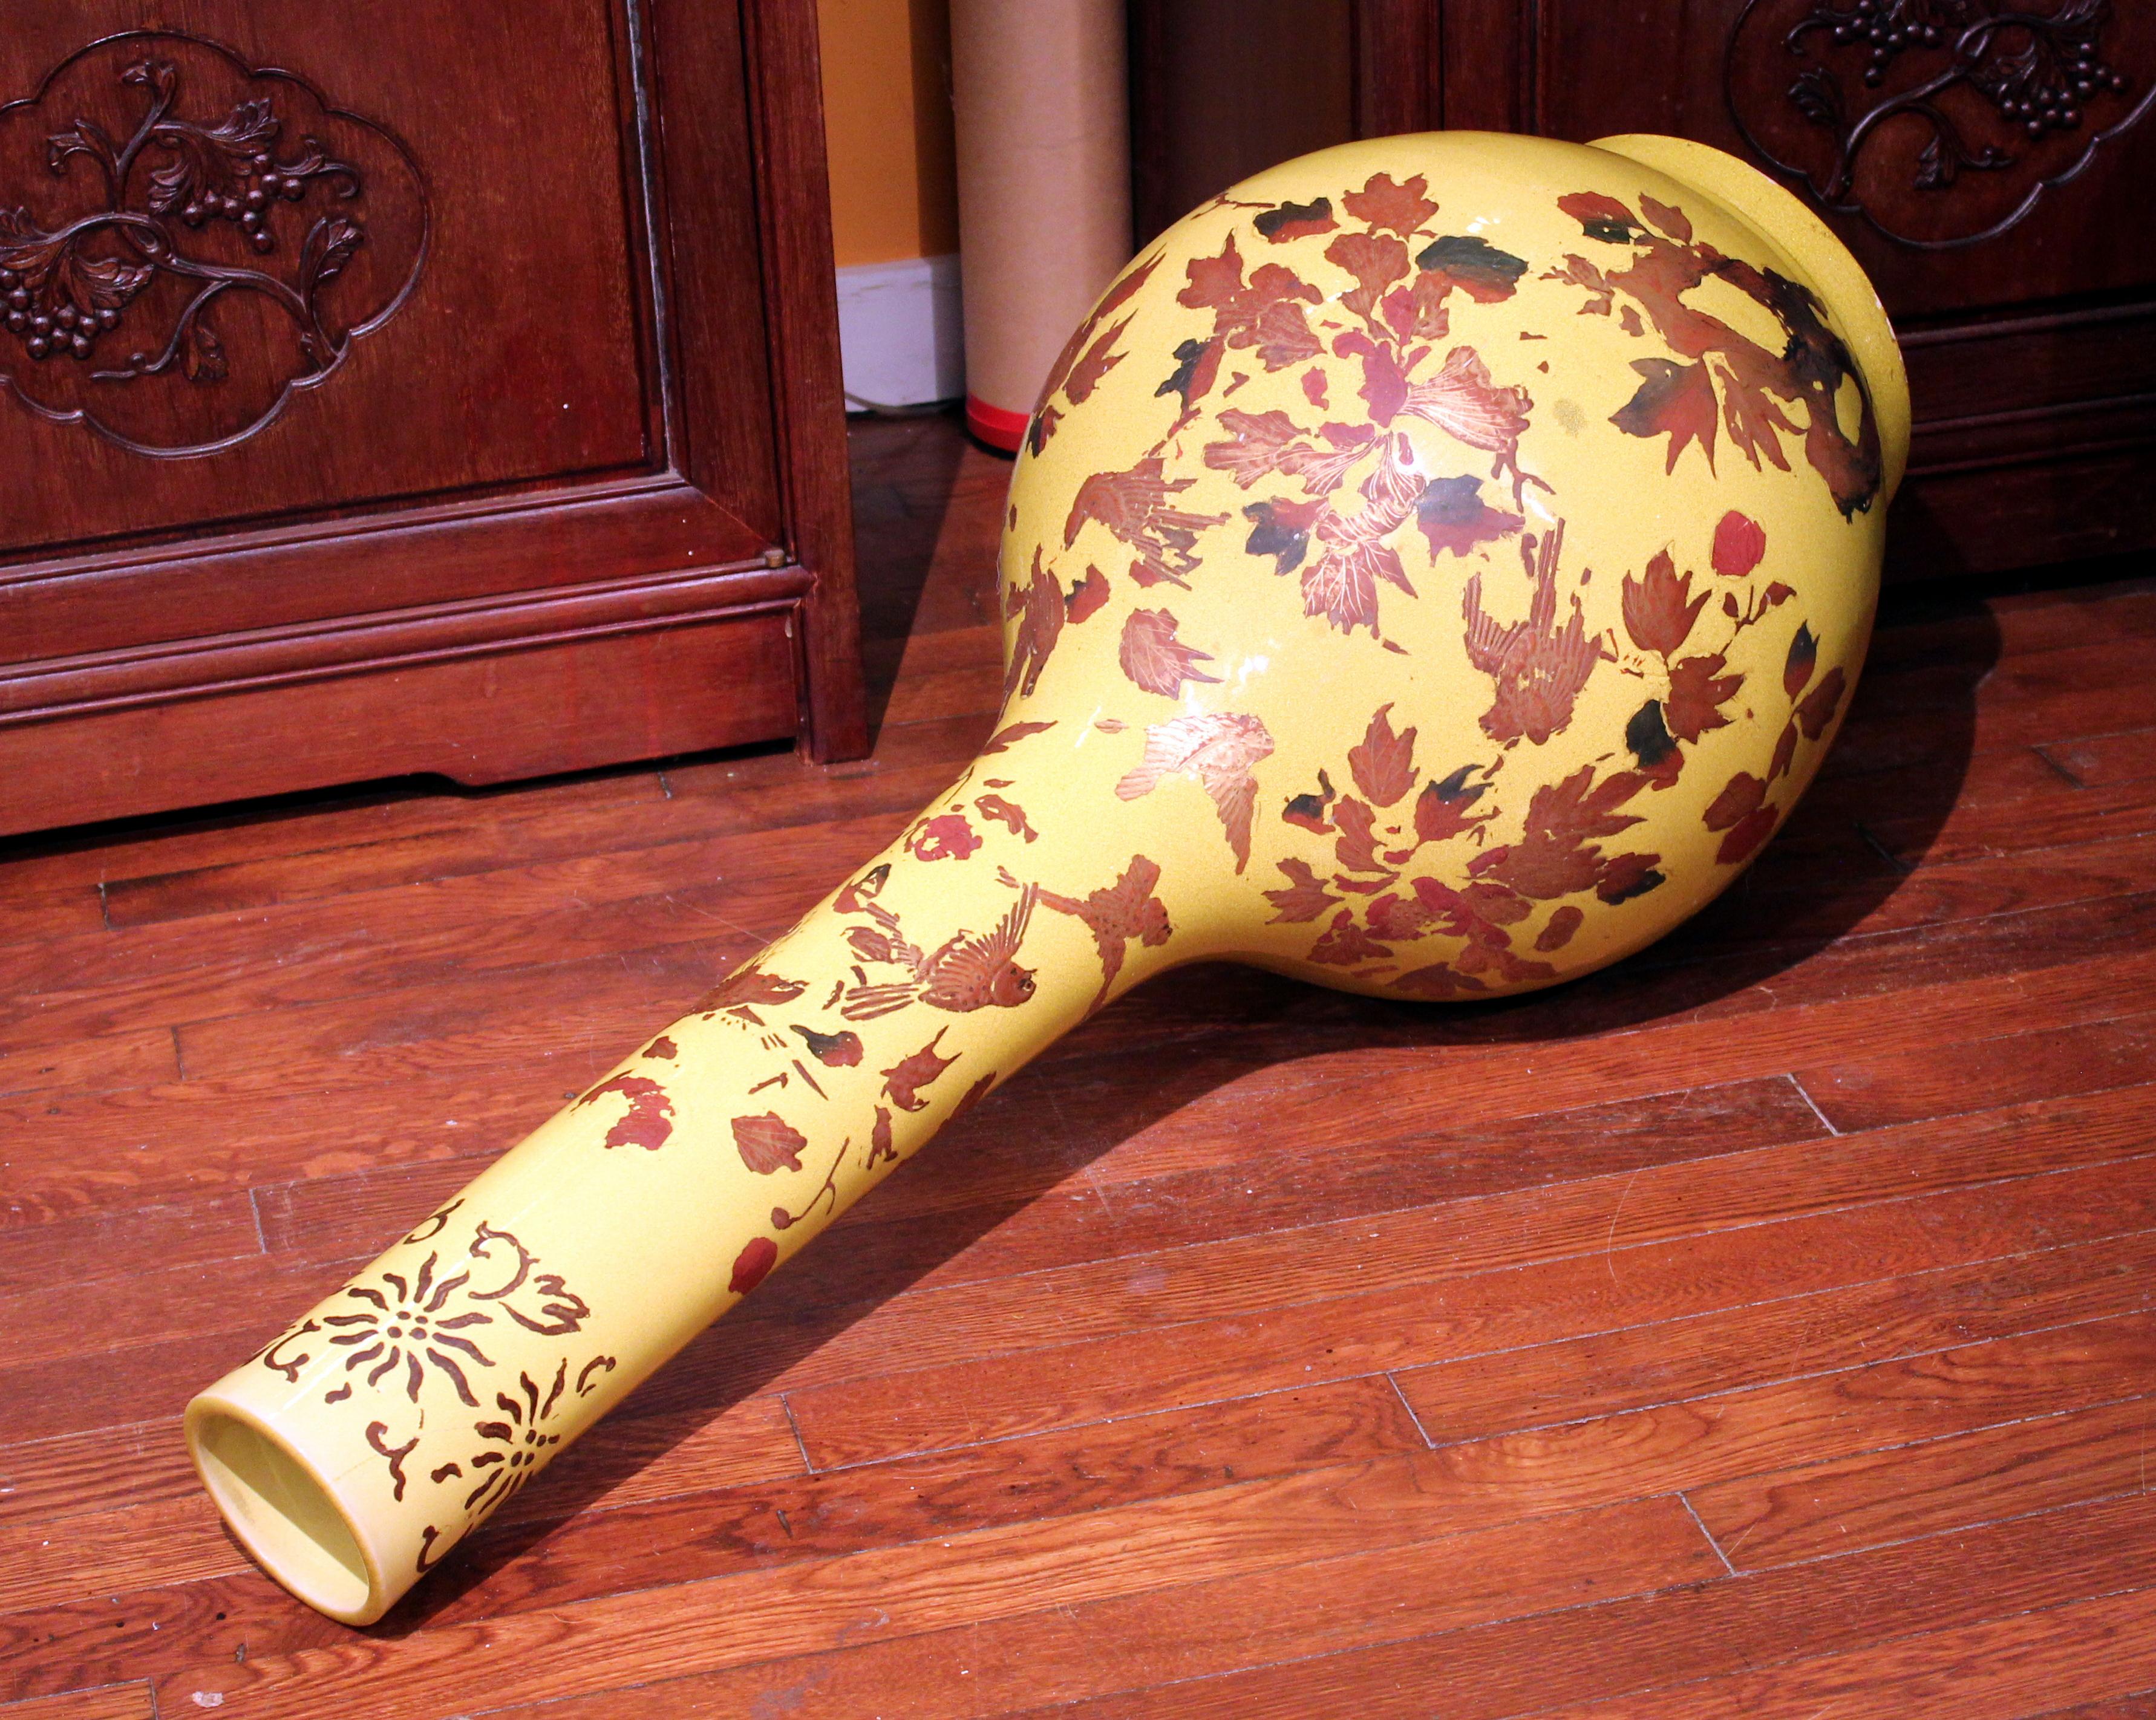 Large Awaji Pottery Bottle Floor Vase Lacquer Decoration In Good Condition For Sale In Wilton, CT